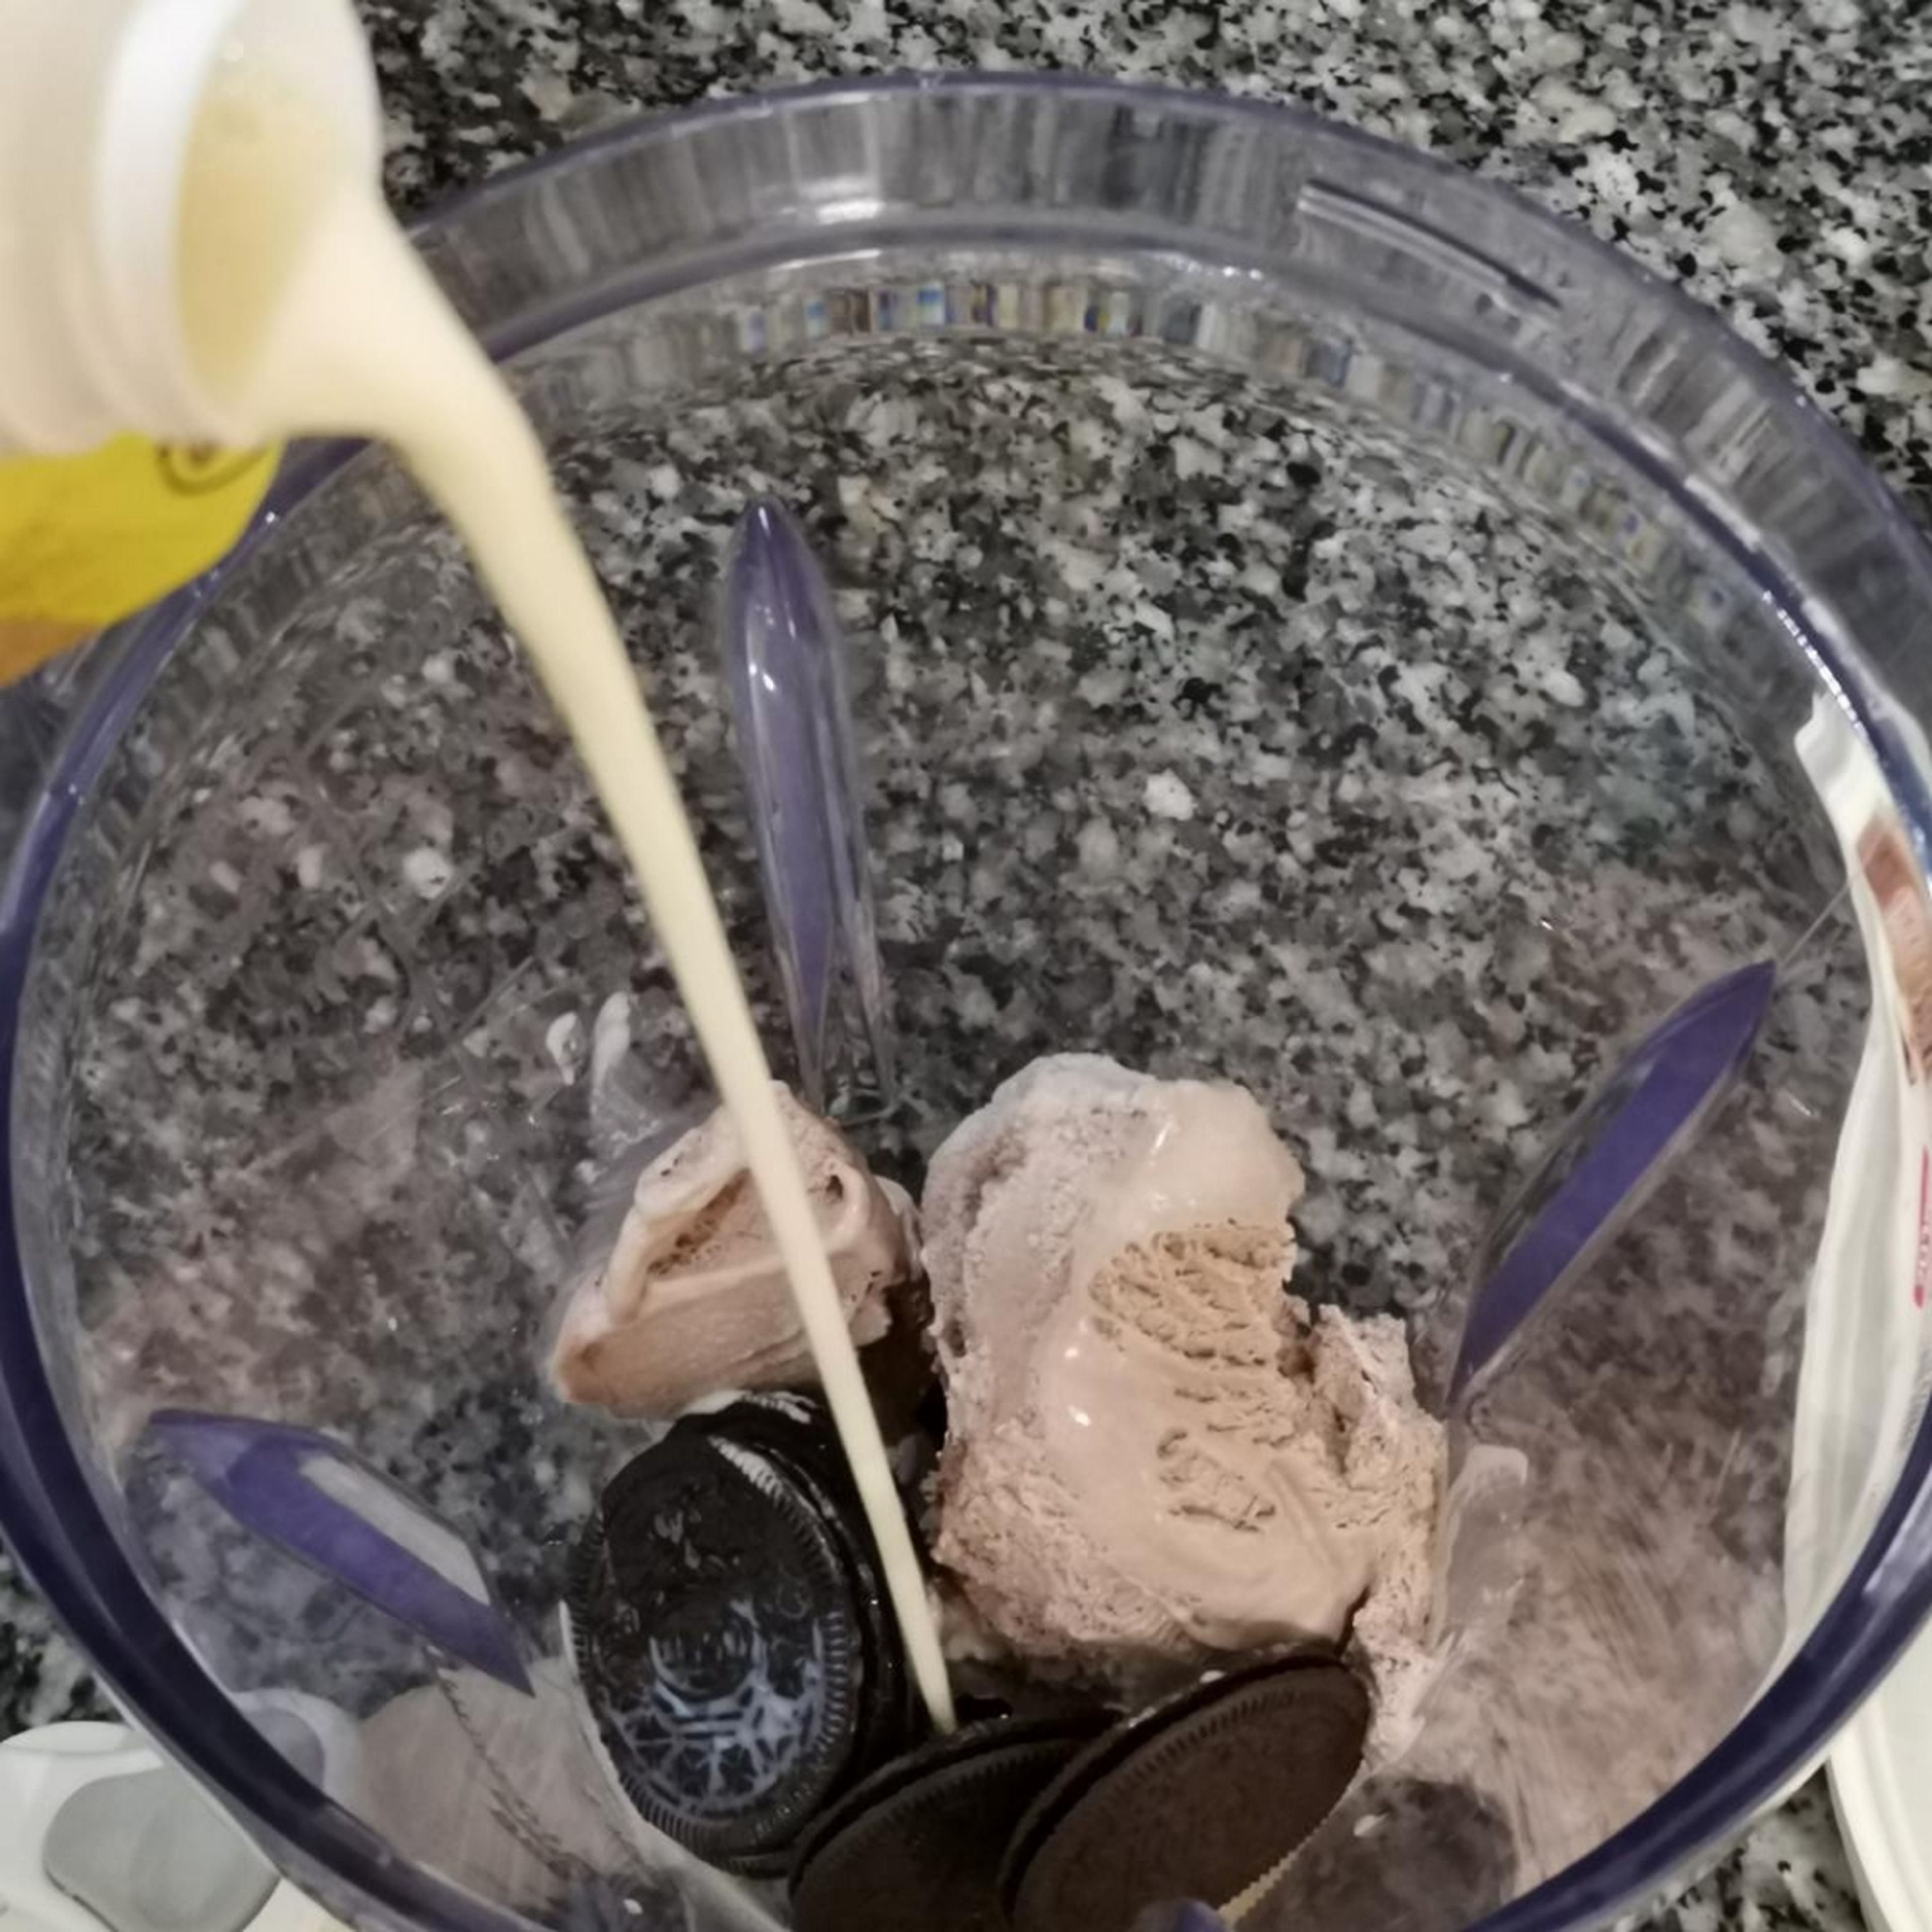 Fill everything with soy vanilla milk